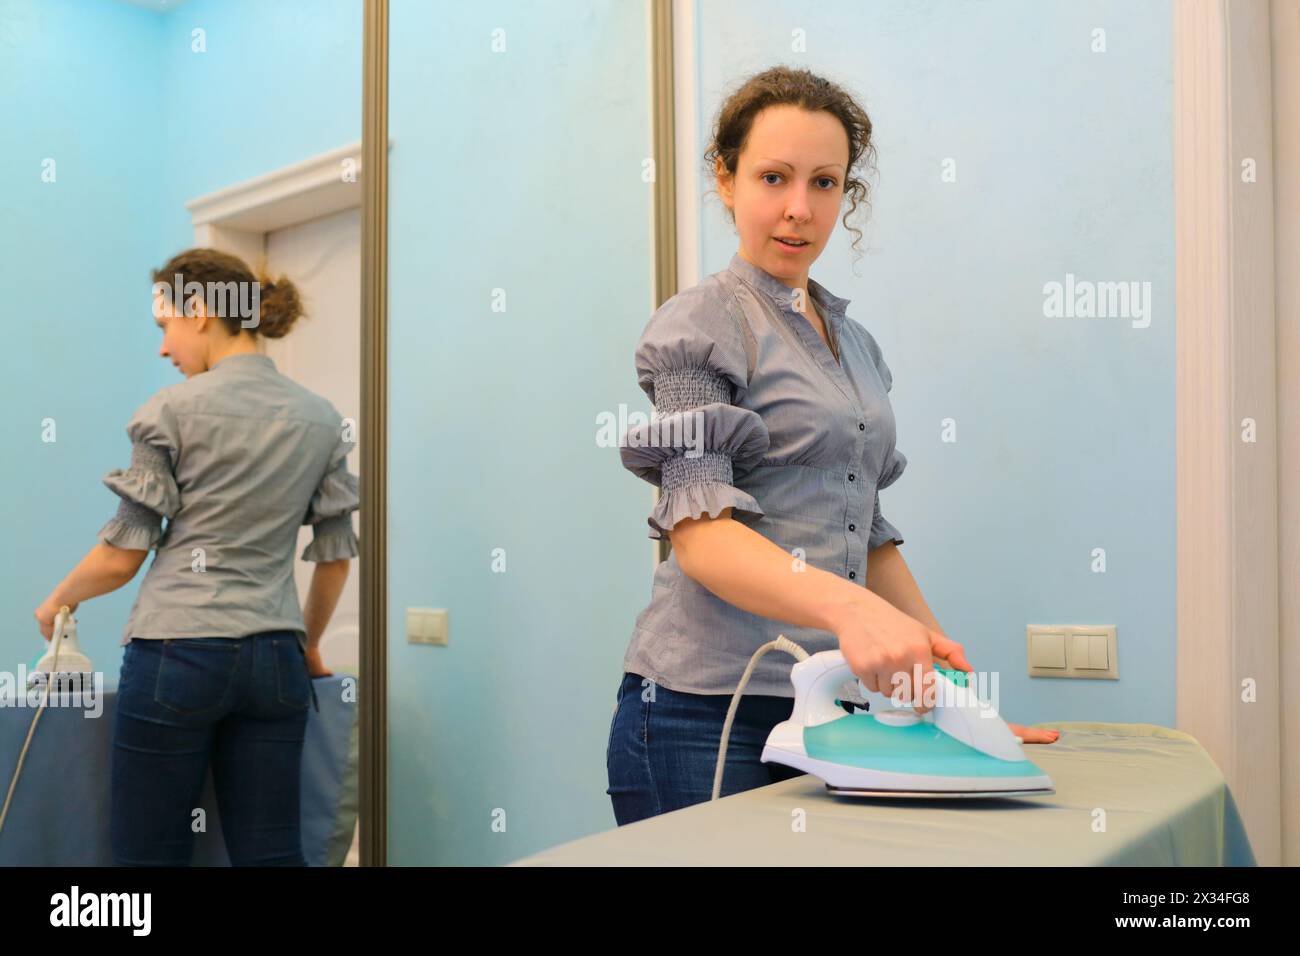 young housewife in gray blouse and jeans was ironing in room, reflected in mirror Stock Photo